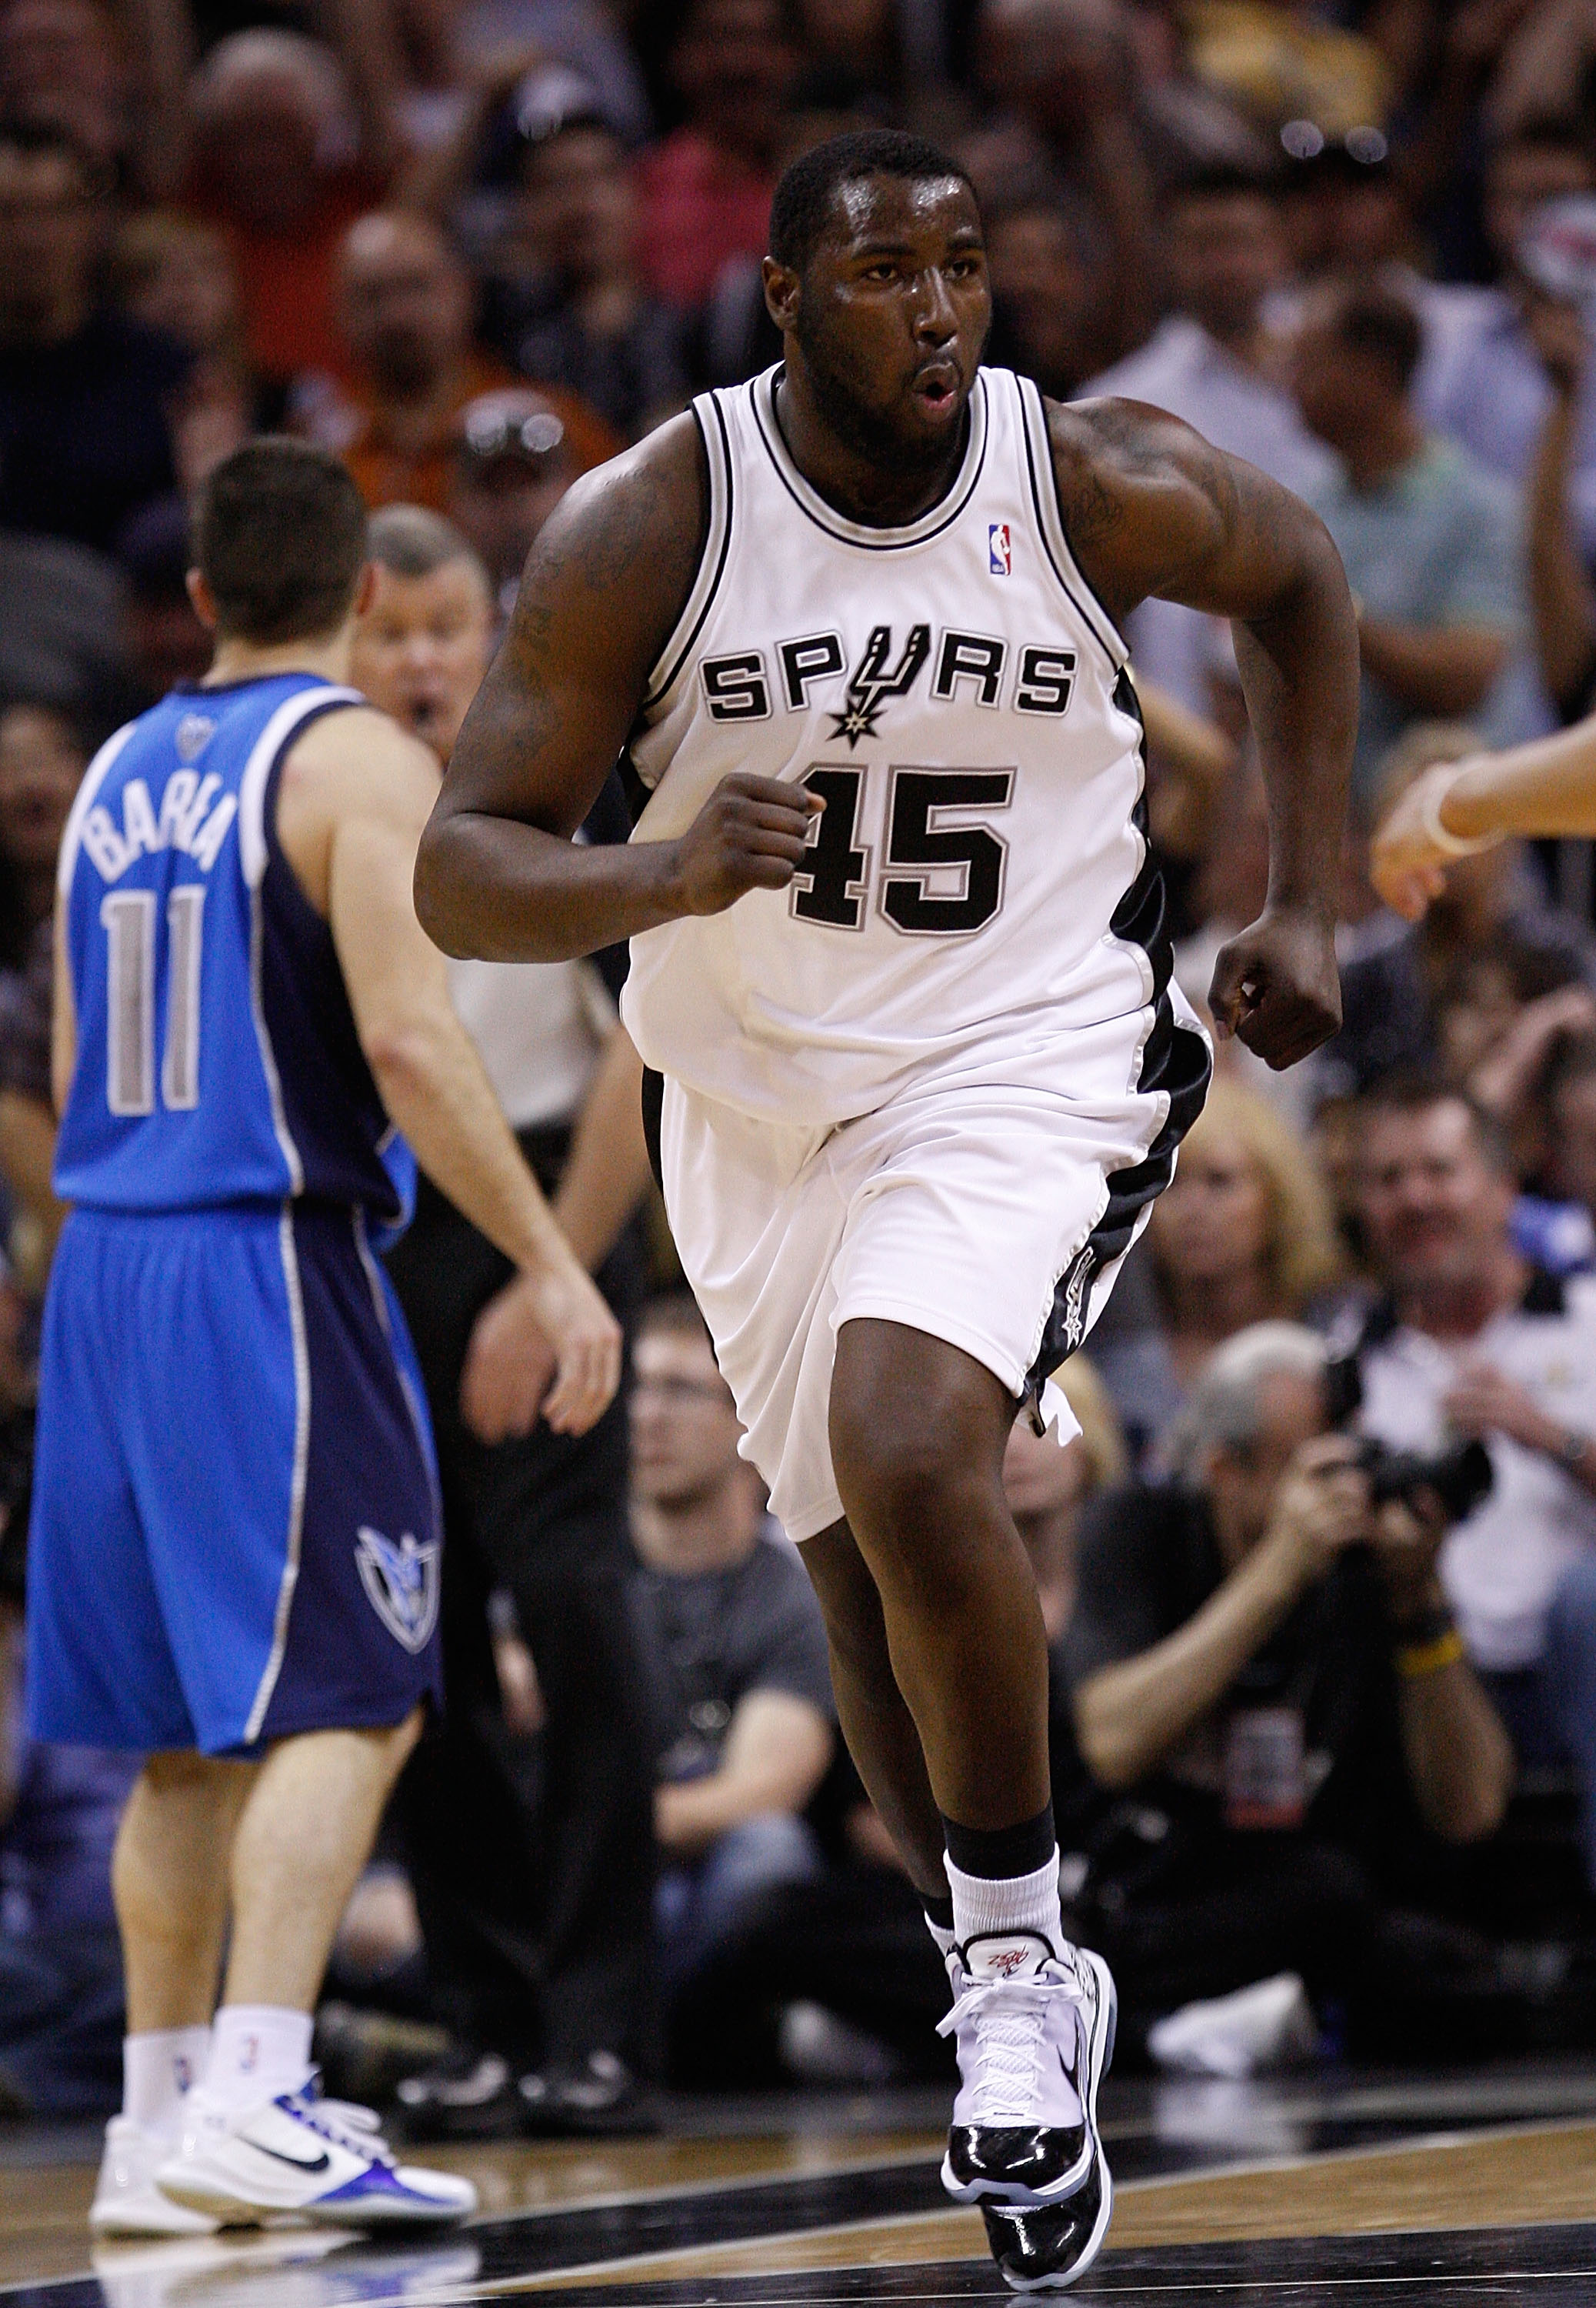 SAN ANTONIO - APRIL 25:  Center DeJuan Blair #45 of the San Antonio Spurs reacts during a 92-89 win against the Dallas Mavericks in Game Four of the Western Conference Quarterfinals during the 2010 NBA Playoffs at AT&T Center on April 25, 2010 in San Anto